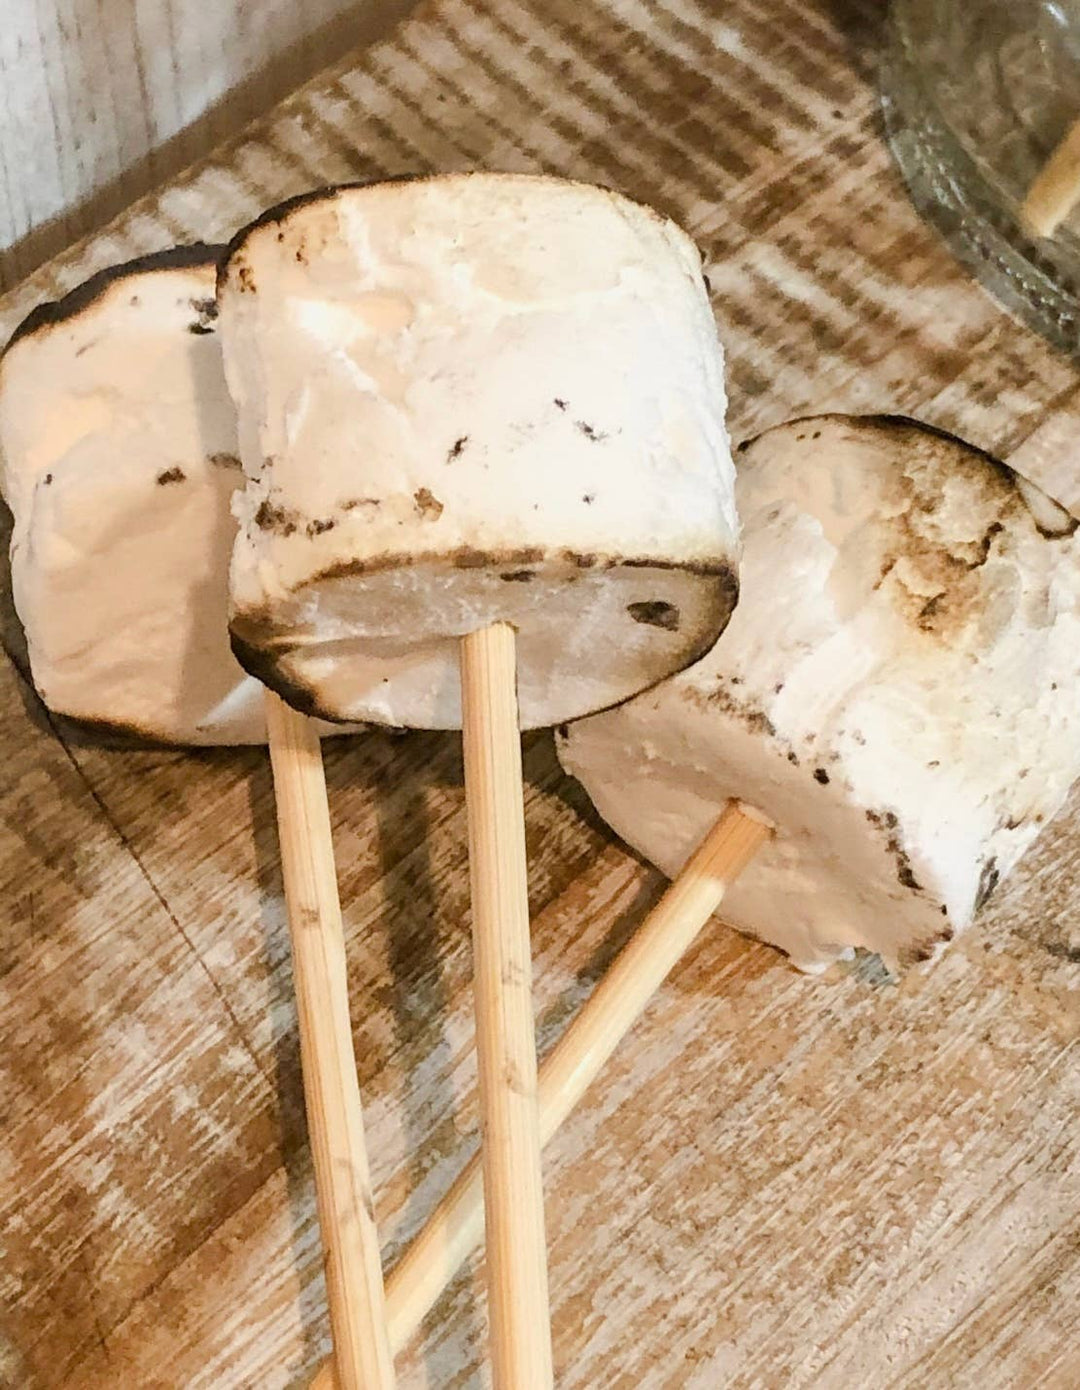 Faux Marshmallows with a skewer, toasted fake marshmallow